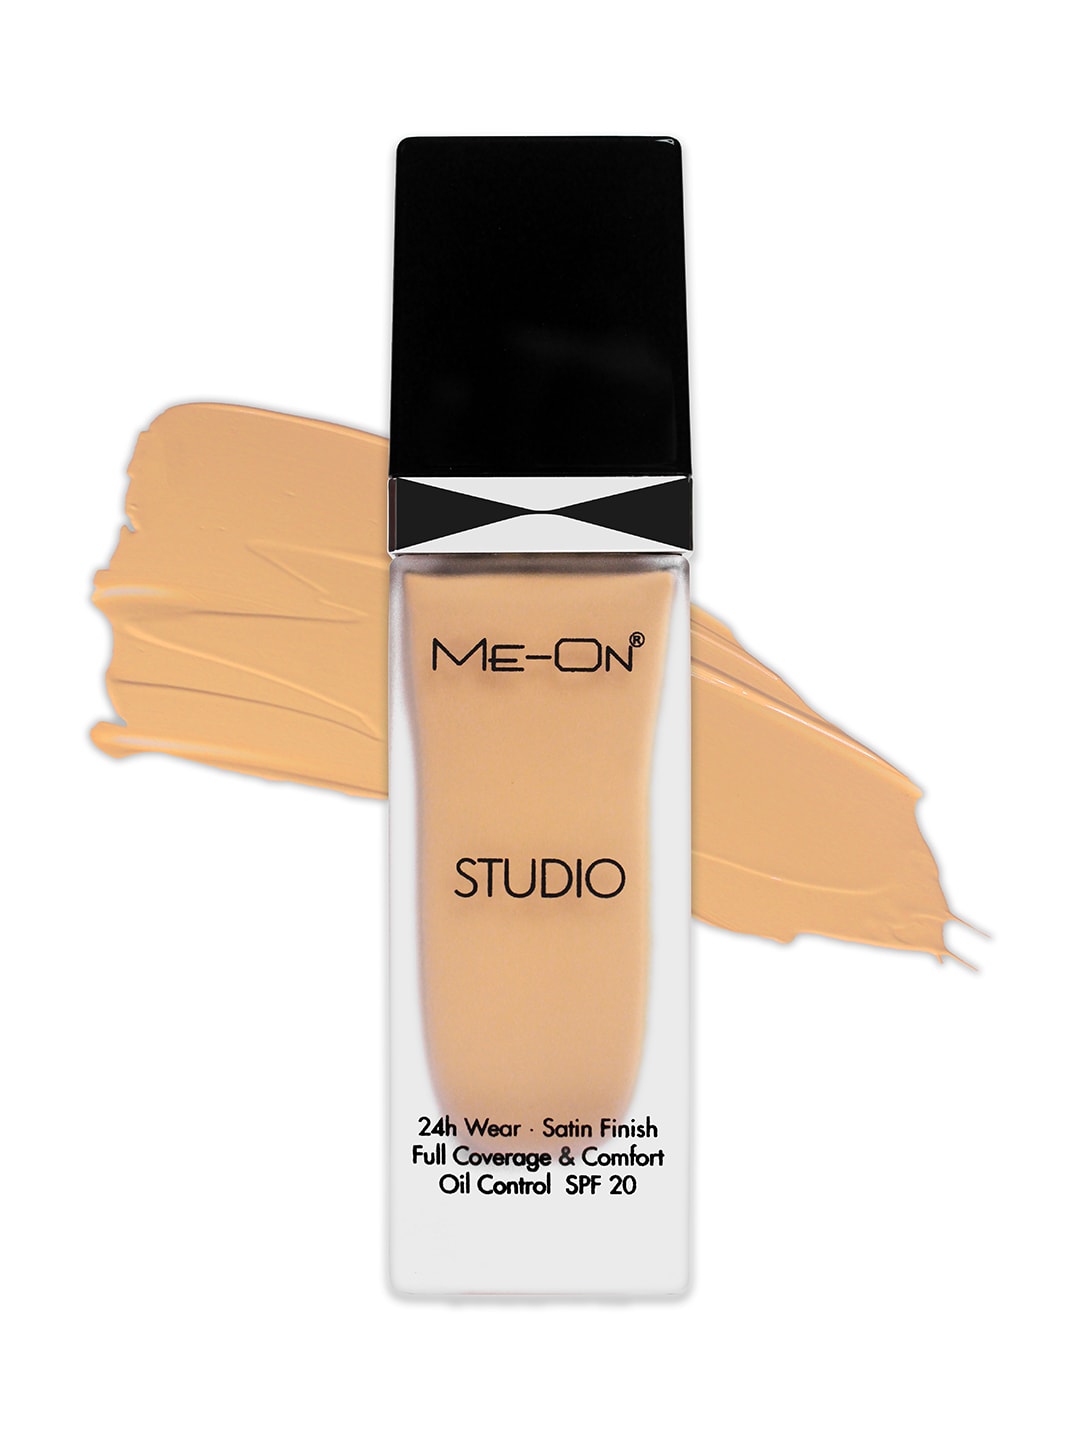 ME-ON Studio Foundation - Shade 02 Price in India